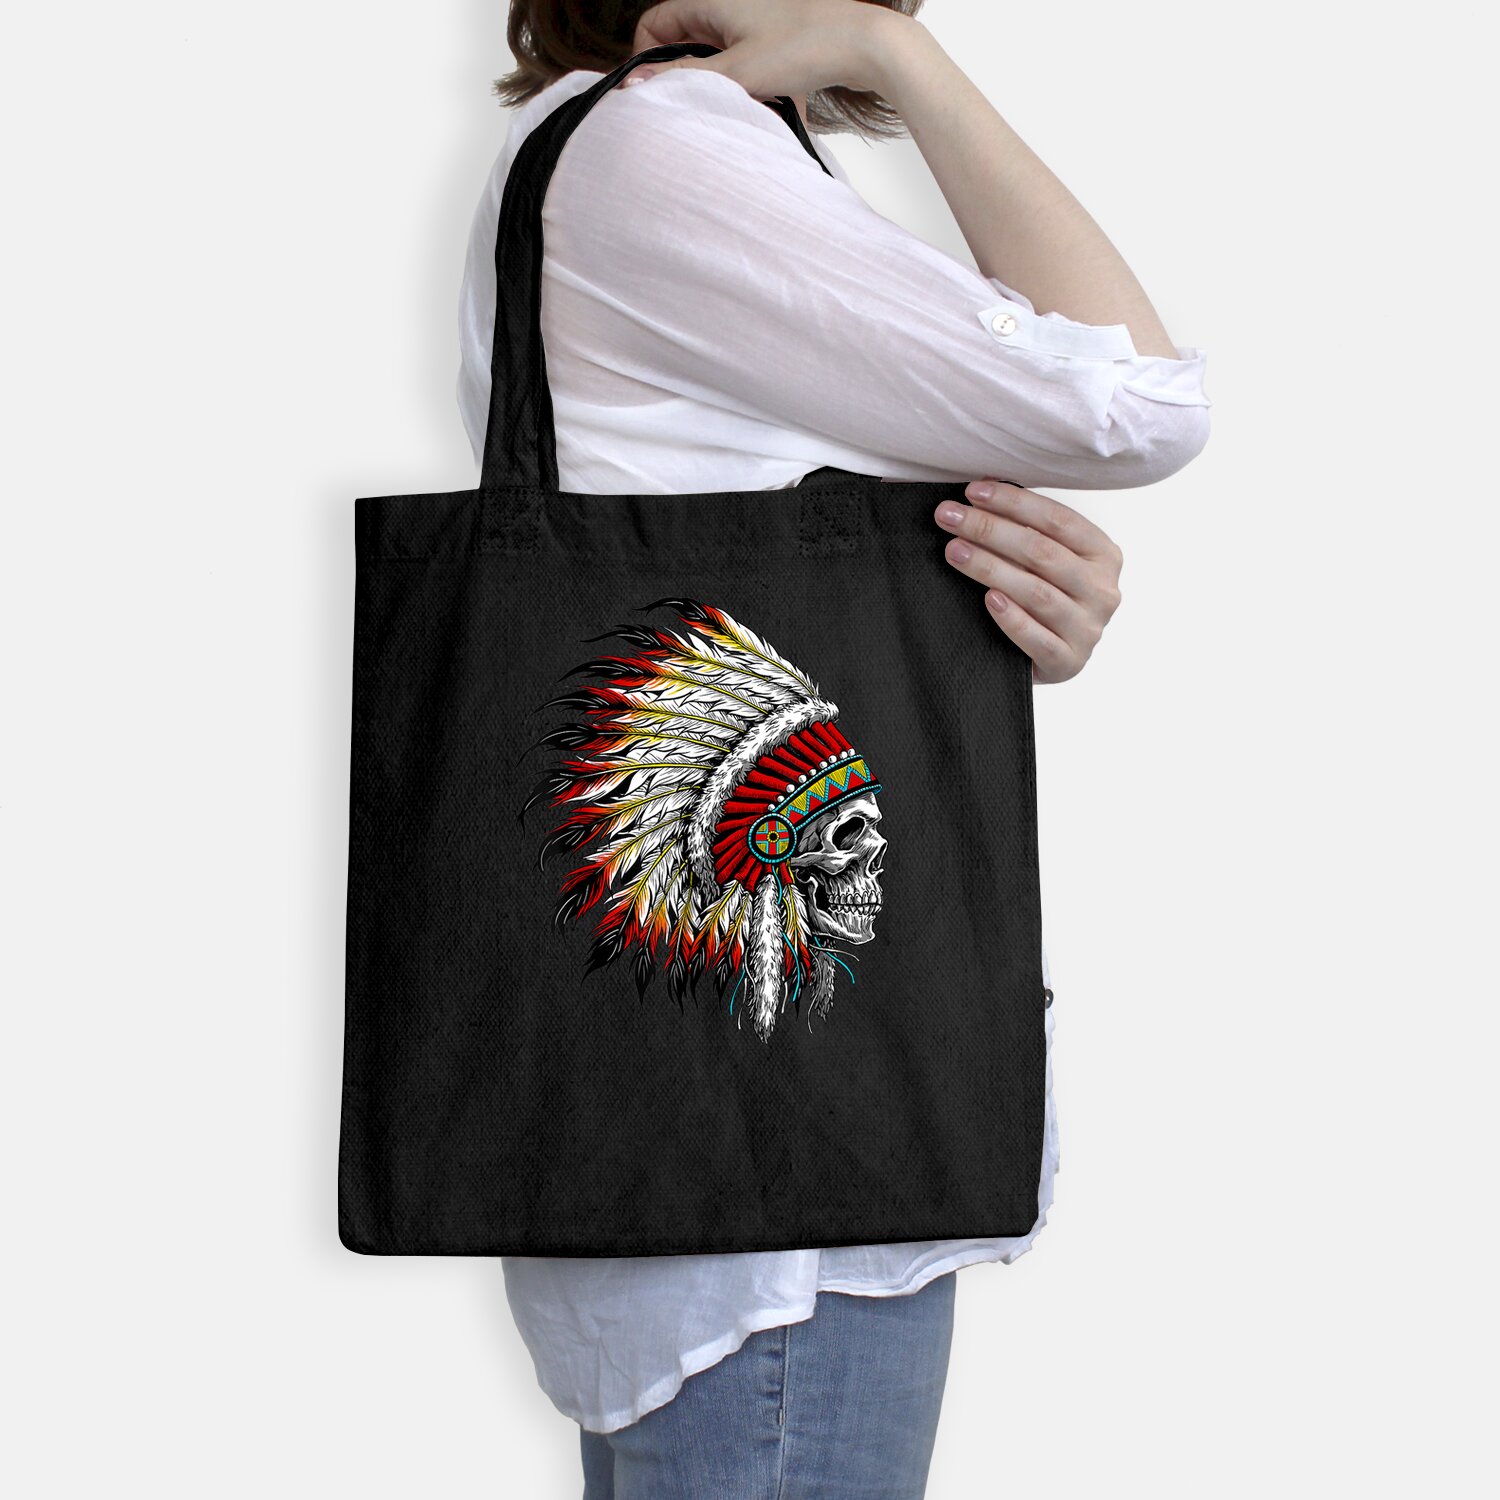 Native American Indian Chief Skull Motorcycle Headdress Tote Bag